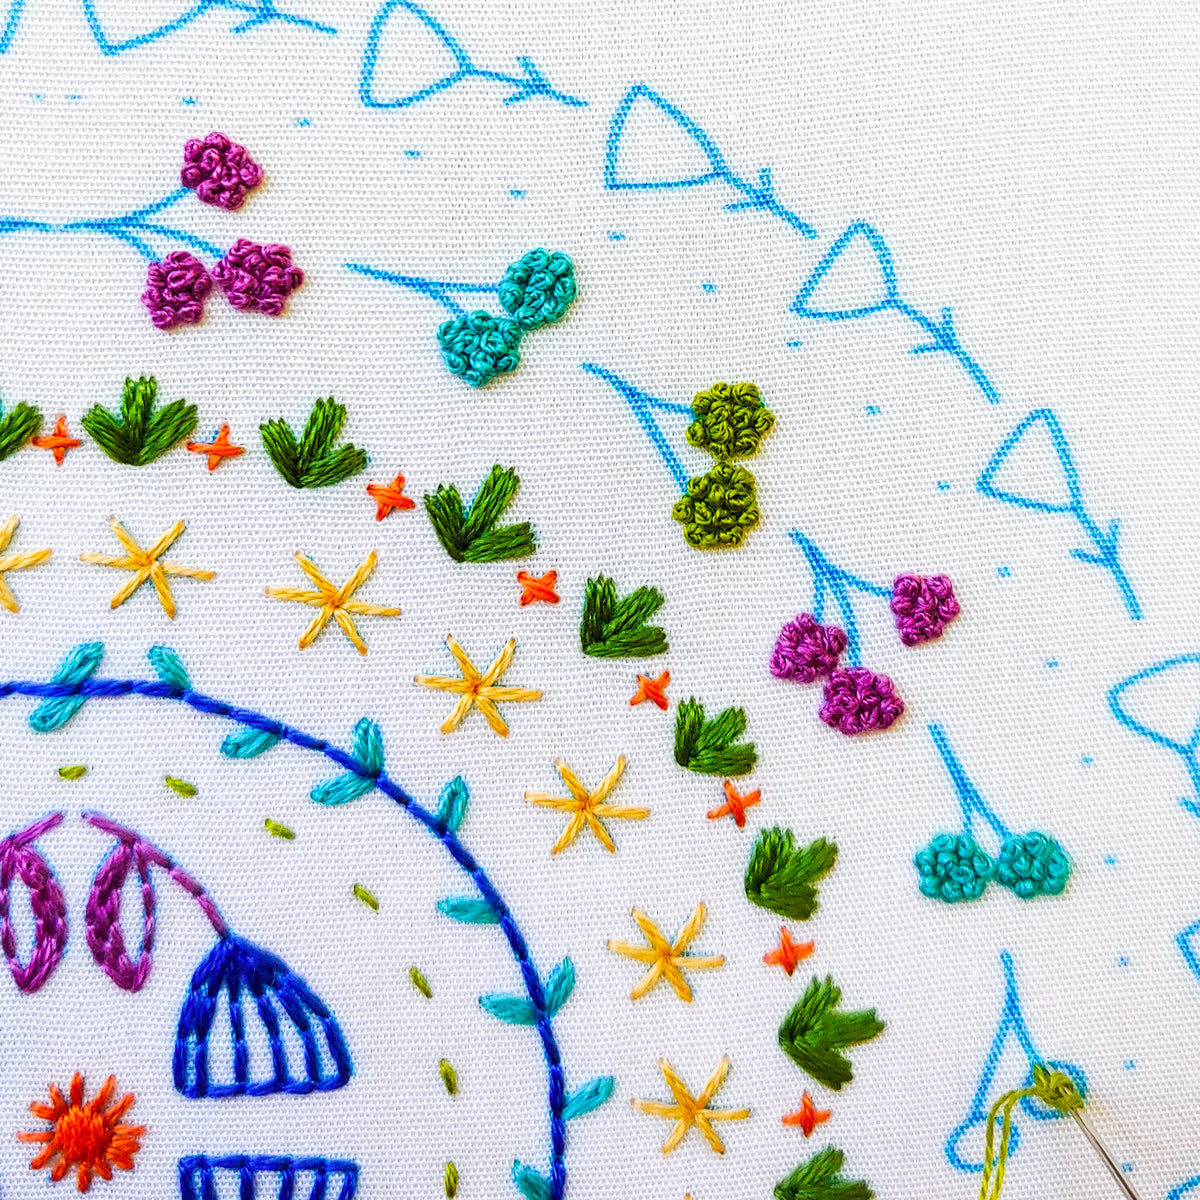 Stitches in the Round Hand Embroidery Kit